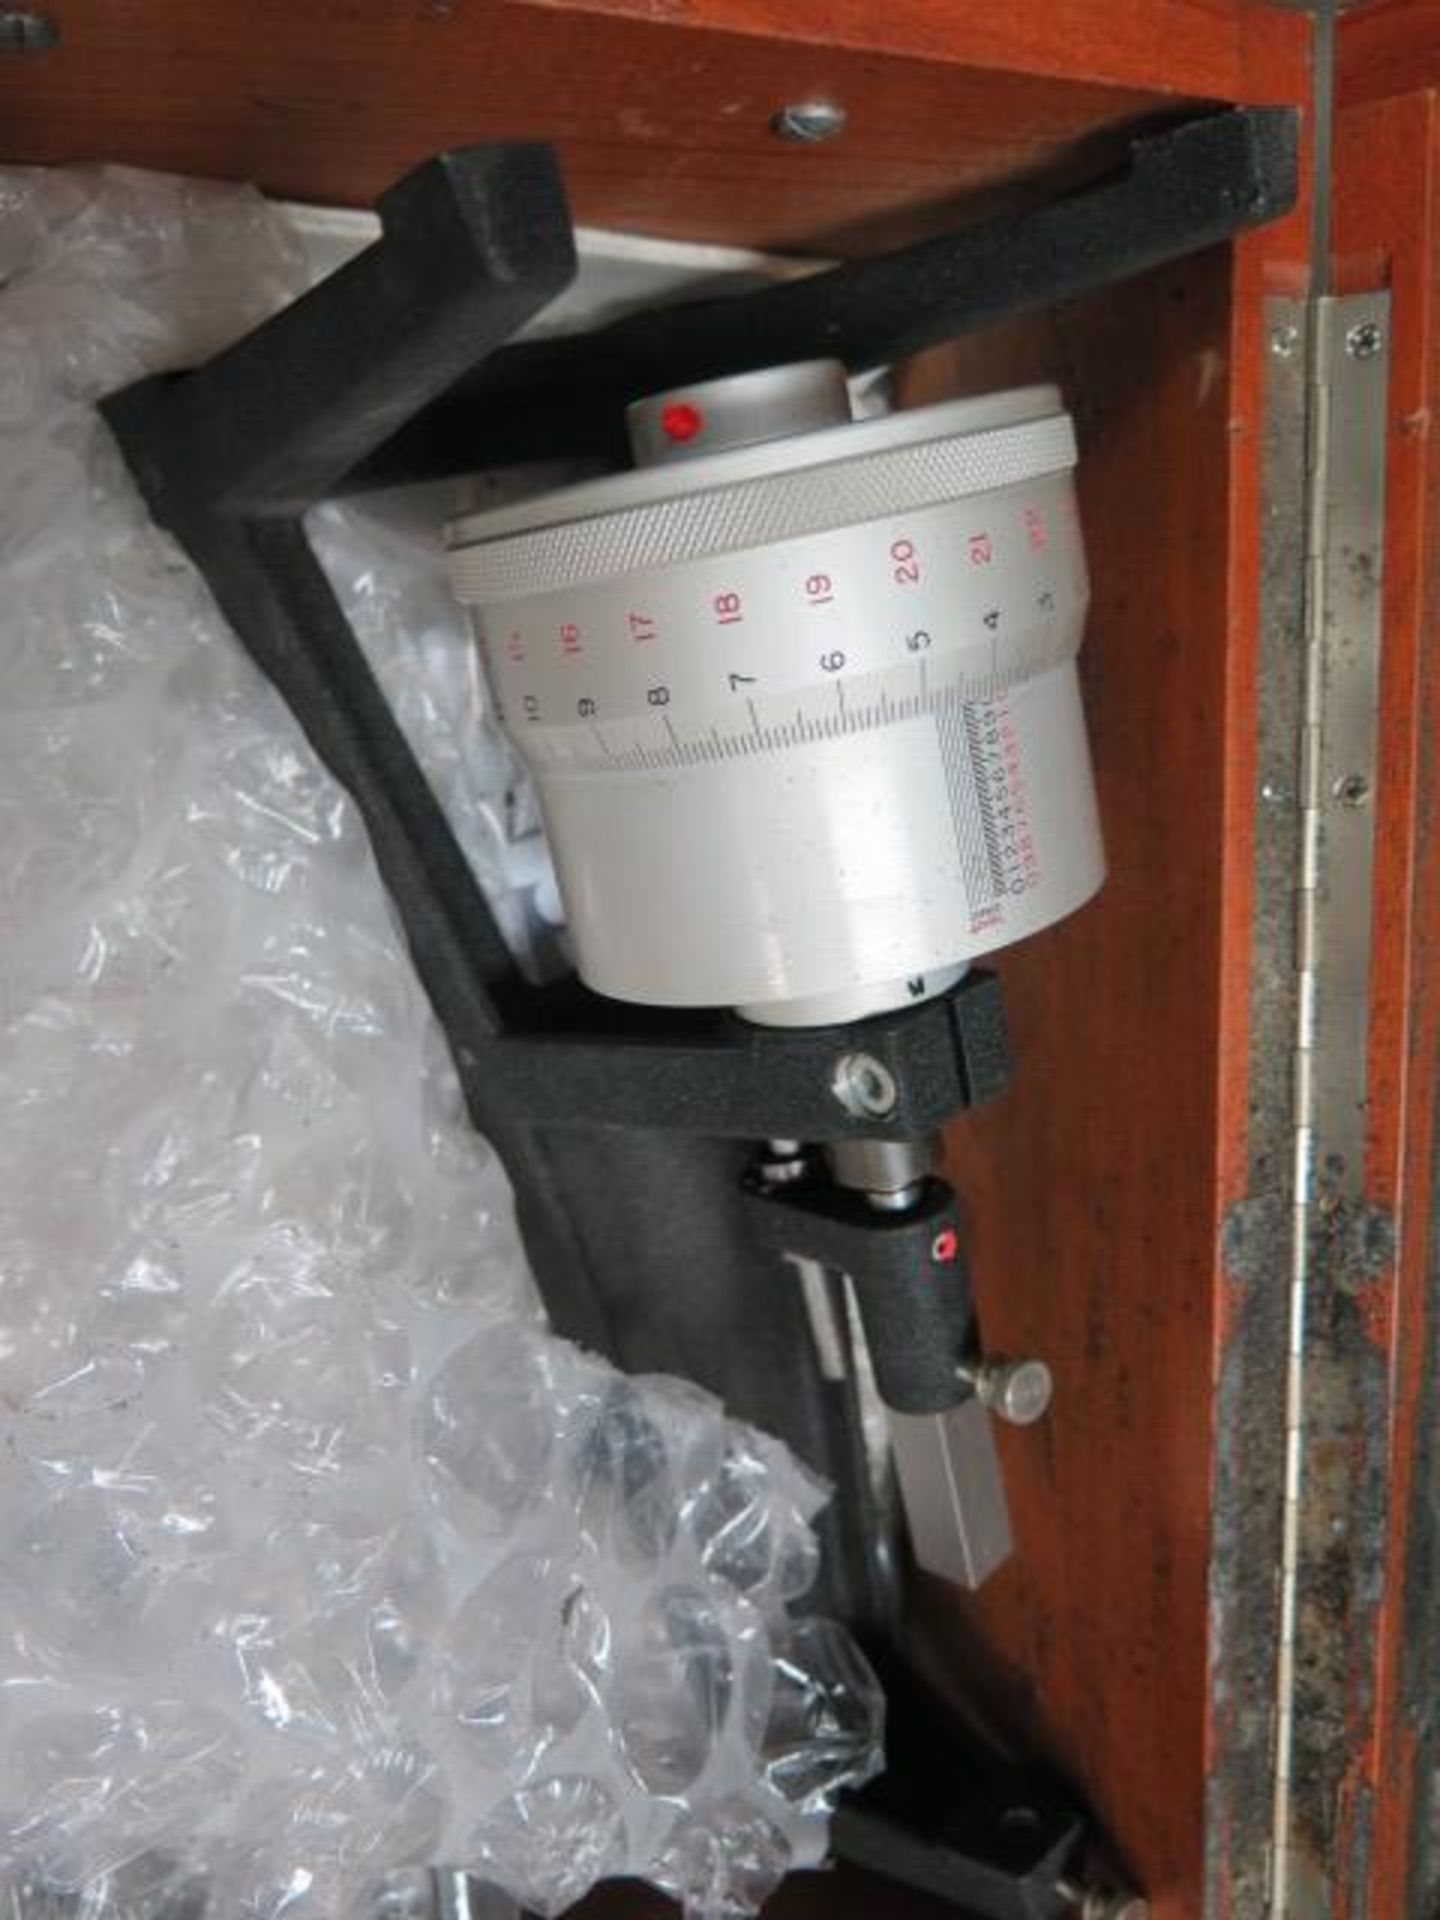 Instron Universal Tension and Compression Testing w/ Instron Controls, Test Fixtures, SOLD AS IS - Image 18 of 29